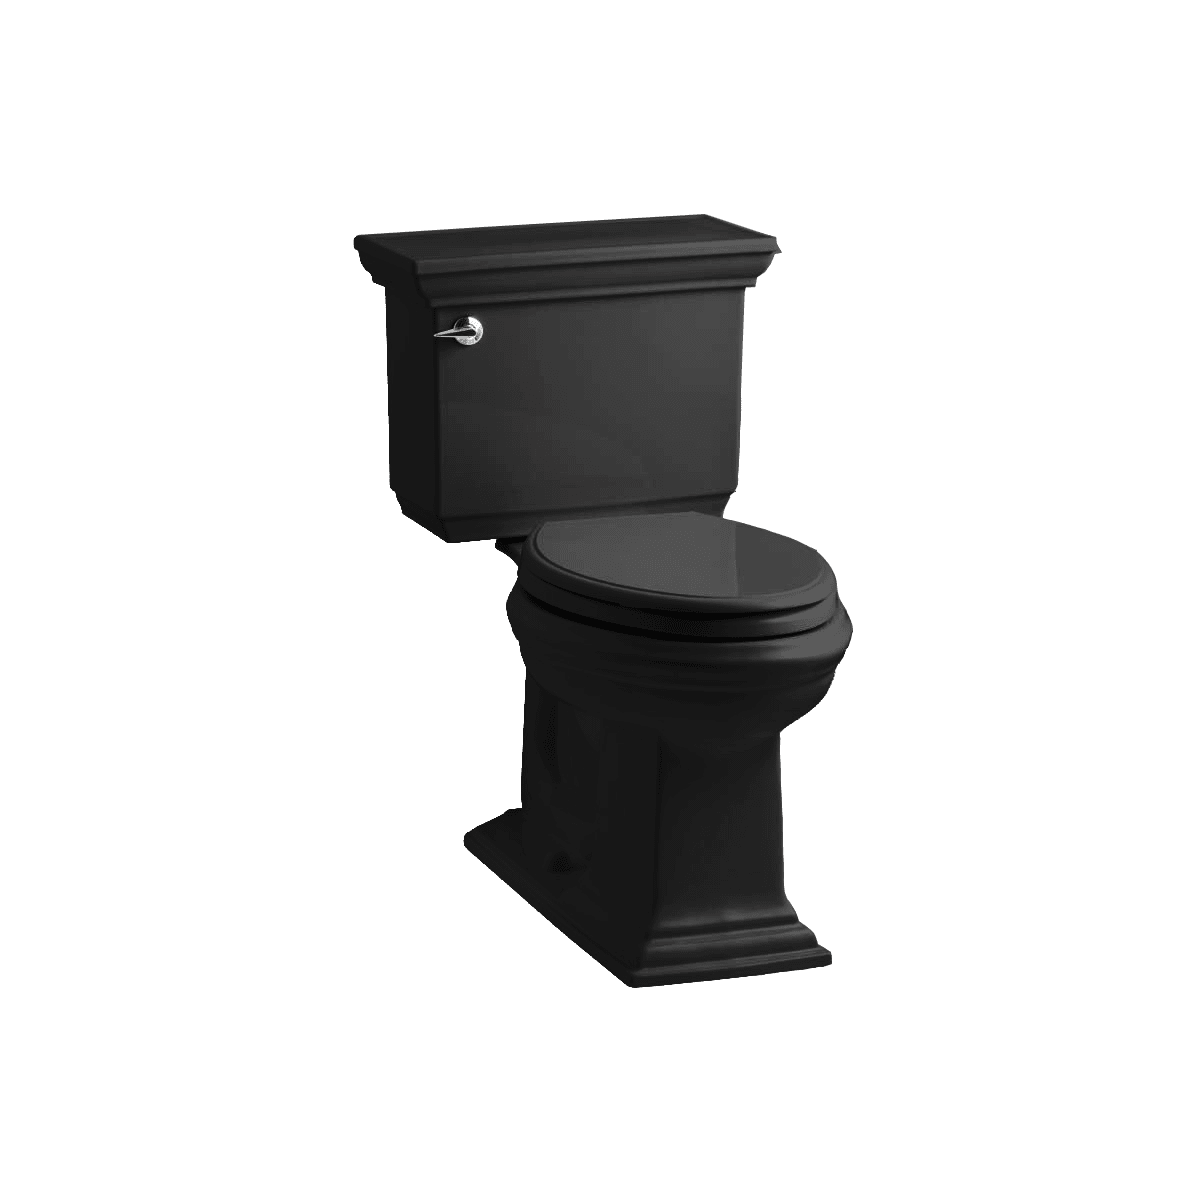 KOHLER K-6428-NY Memoirs Stately Comfort Height Skirted One-Piece Compact Elongated 1.28 GPF Toilet with AquaPiston Flush Technology and Left-Hand Trip Lever Dune 